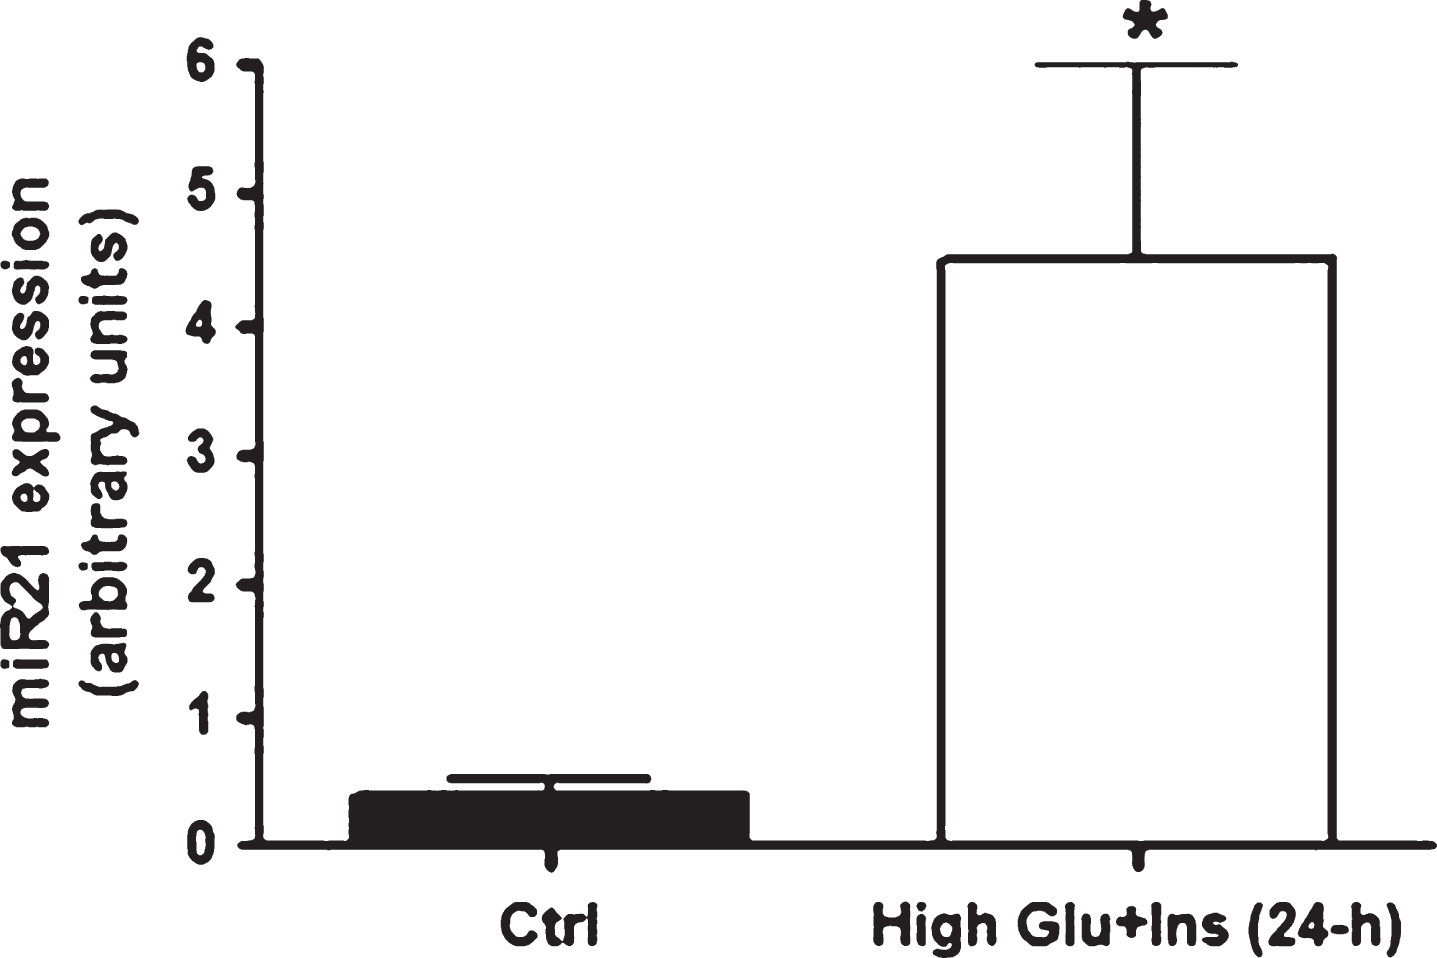 miR21 expression levels in primary human adipocytes after 24-h exposure to high glucose and high insulin concentrations. miR21 expression up-regulation in mature adipocytes (at ten days after differentiation induction) after 24-hour exposure to high glucose (20 mmol/L) and high insulin (104 lU/mL) concentrations.